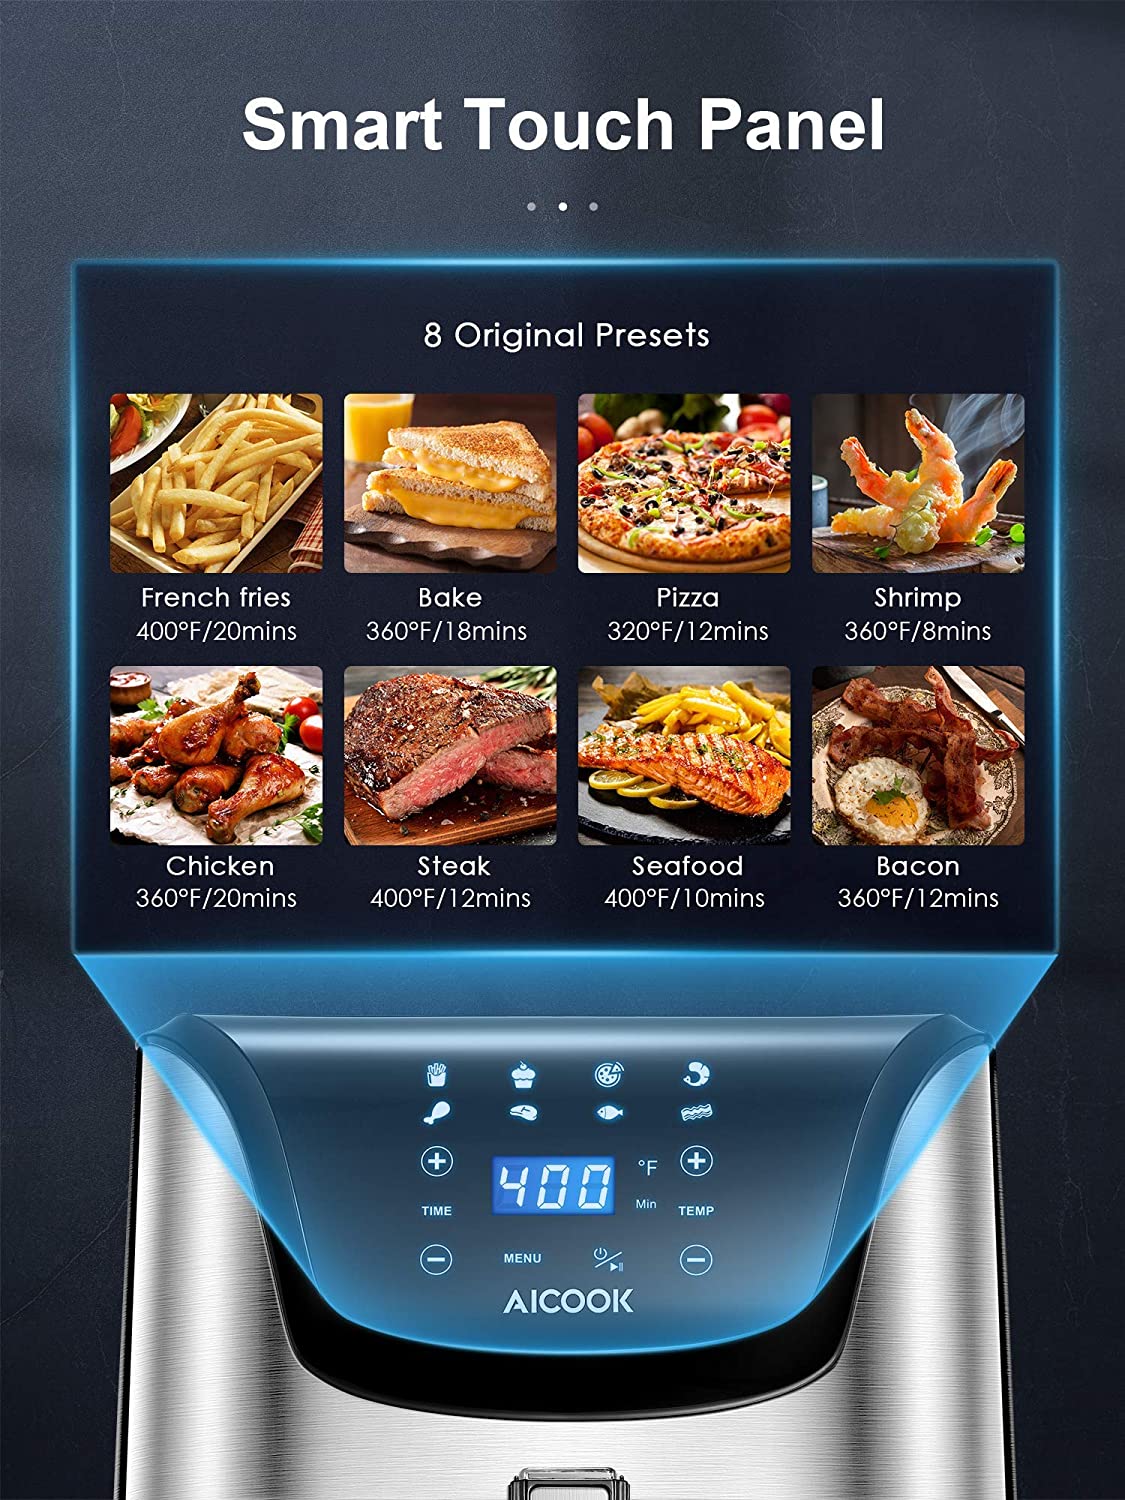 AICOOK AIR FRYER 5.8QT, Air Fryer Oven, Digital Control, Dishwasher-Safe, Smart Touch Panel, Recipe Included, Silver, 2021